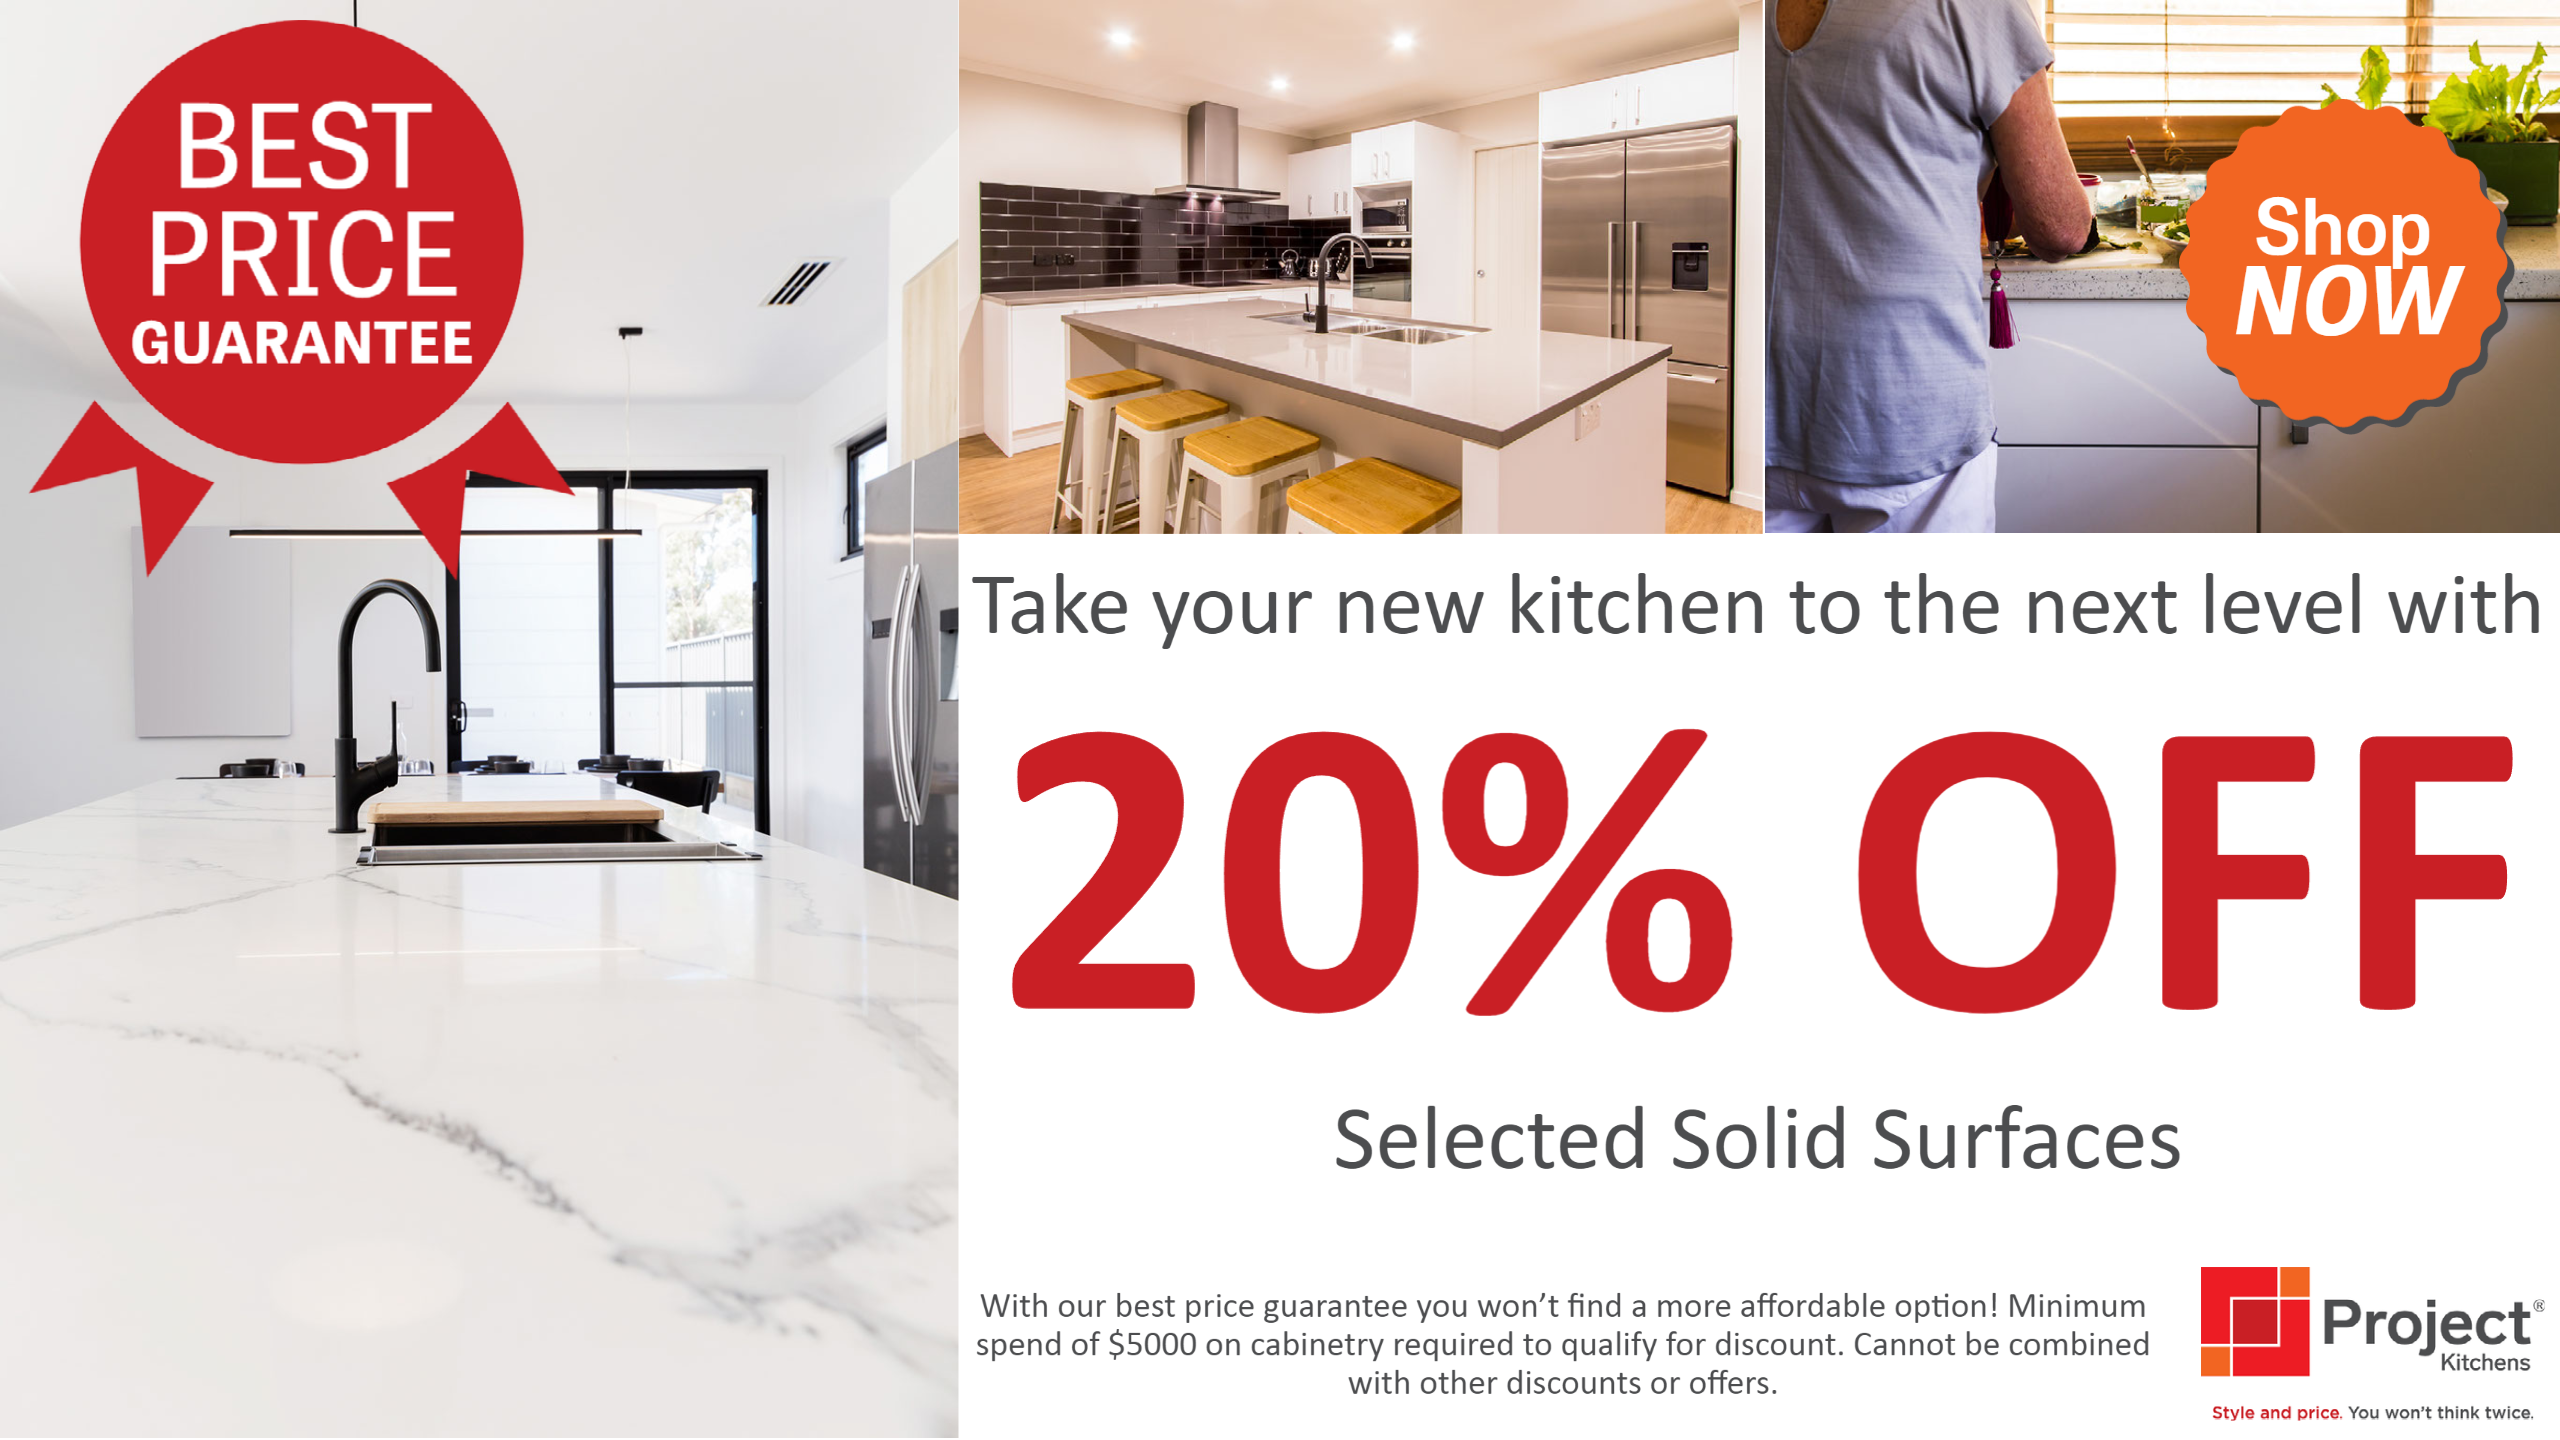 Save 20% Off Selected Solid Surfaces